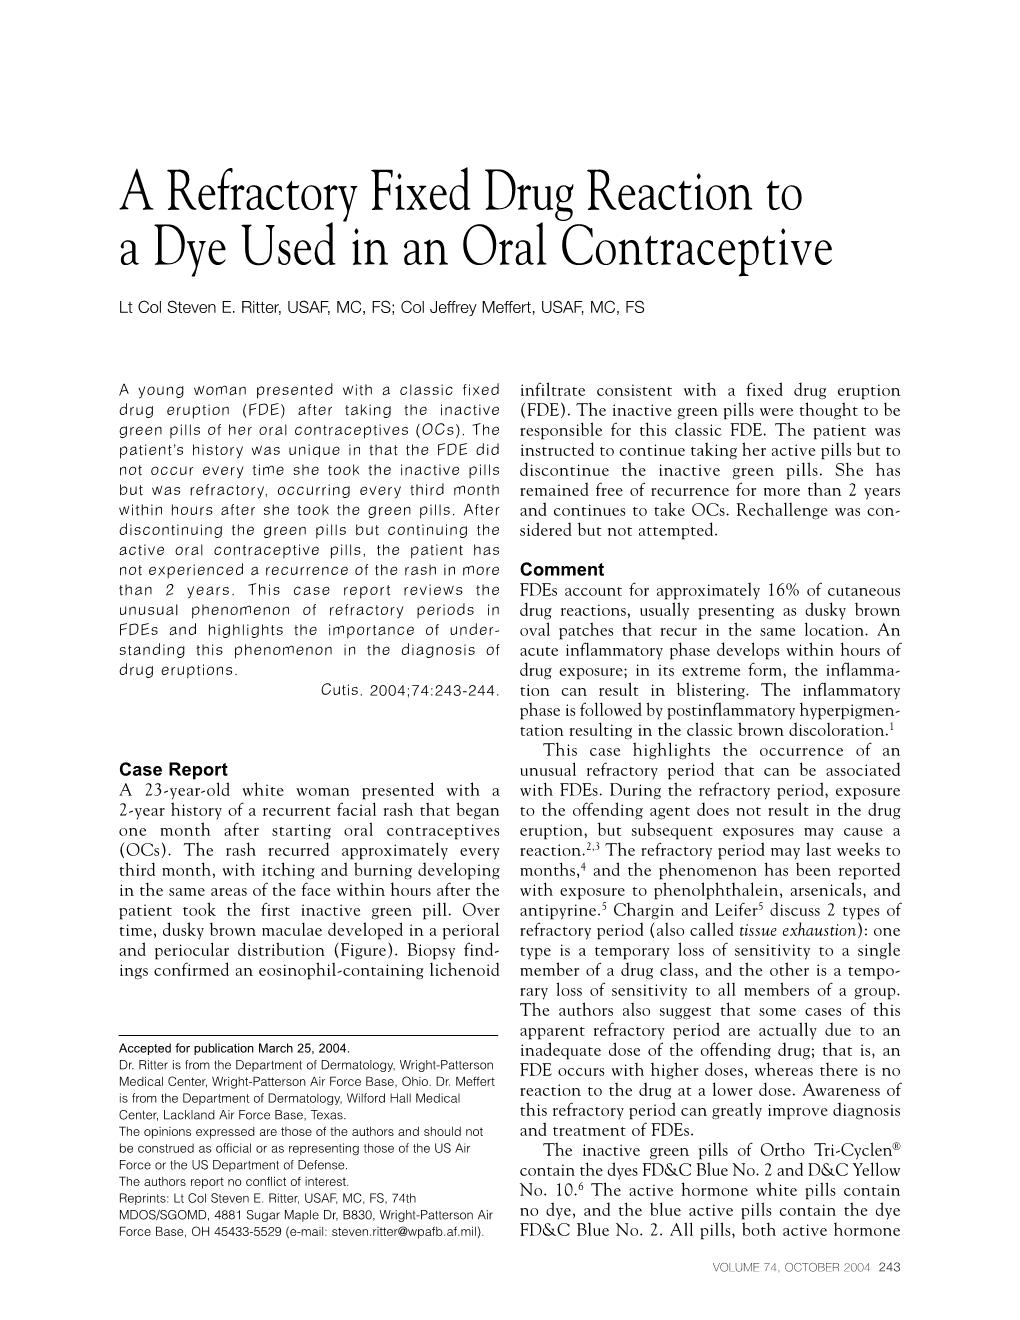 A Refractory Fixed Drug Reaction to a Dye Used in an Oral Contraceptive